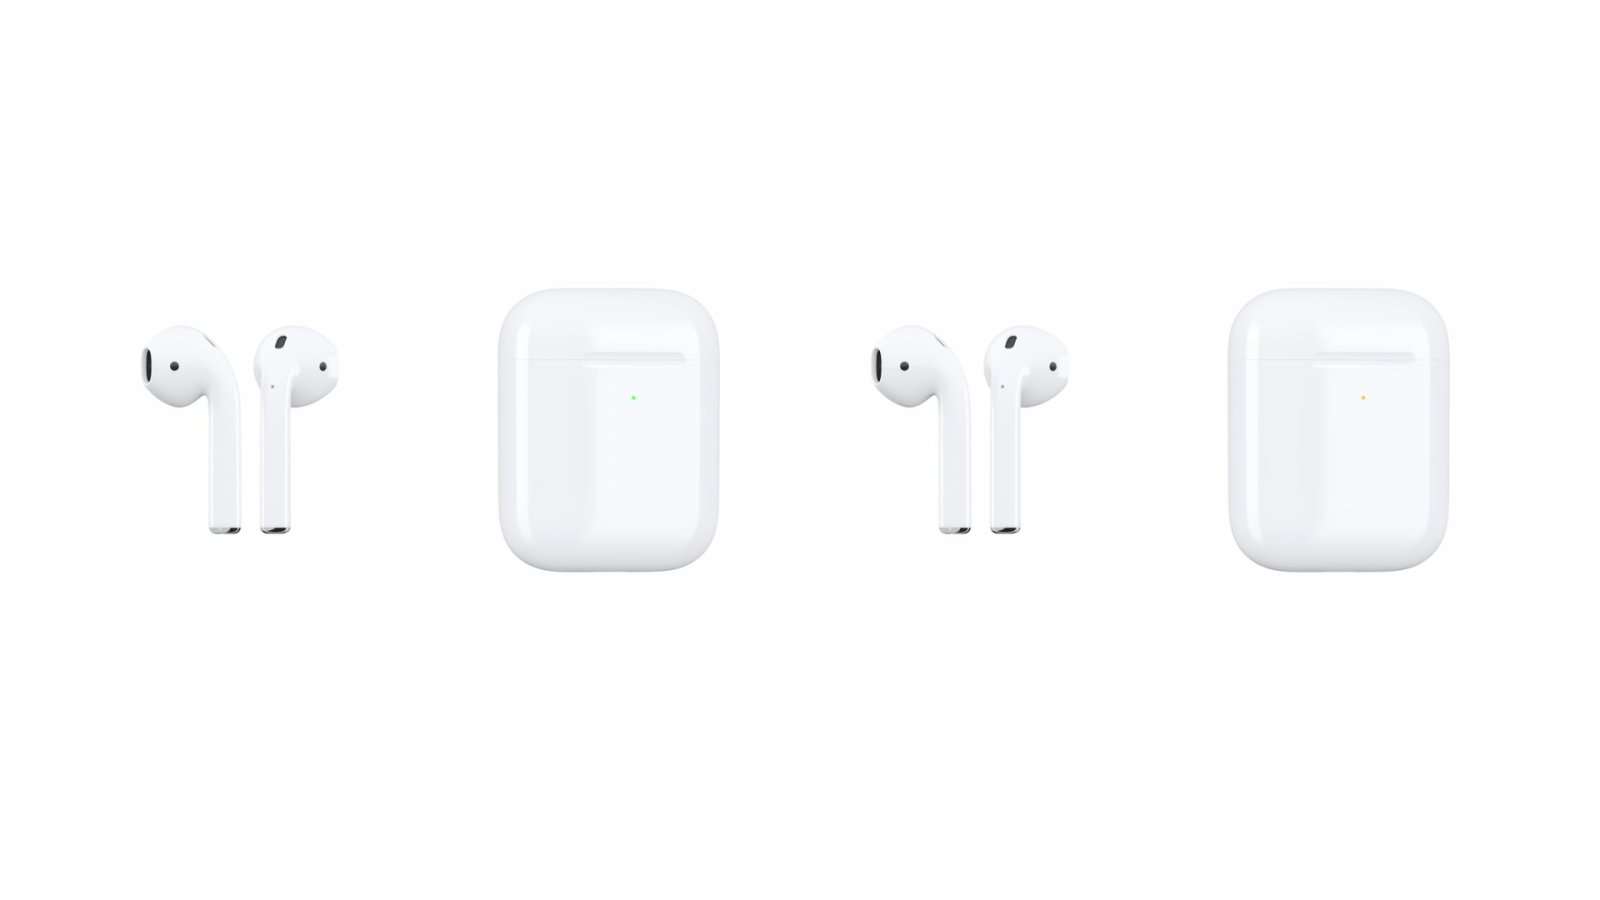 image for Rumors: AirPods wireless charging will charge to full in 15 minutes, thicker and heavier case, Dark Mode coming in iOS 13.1